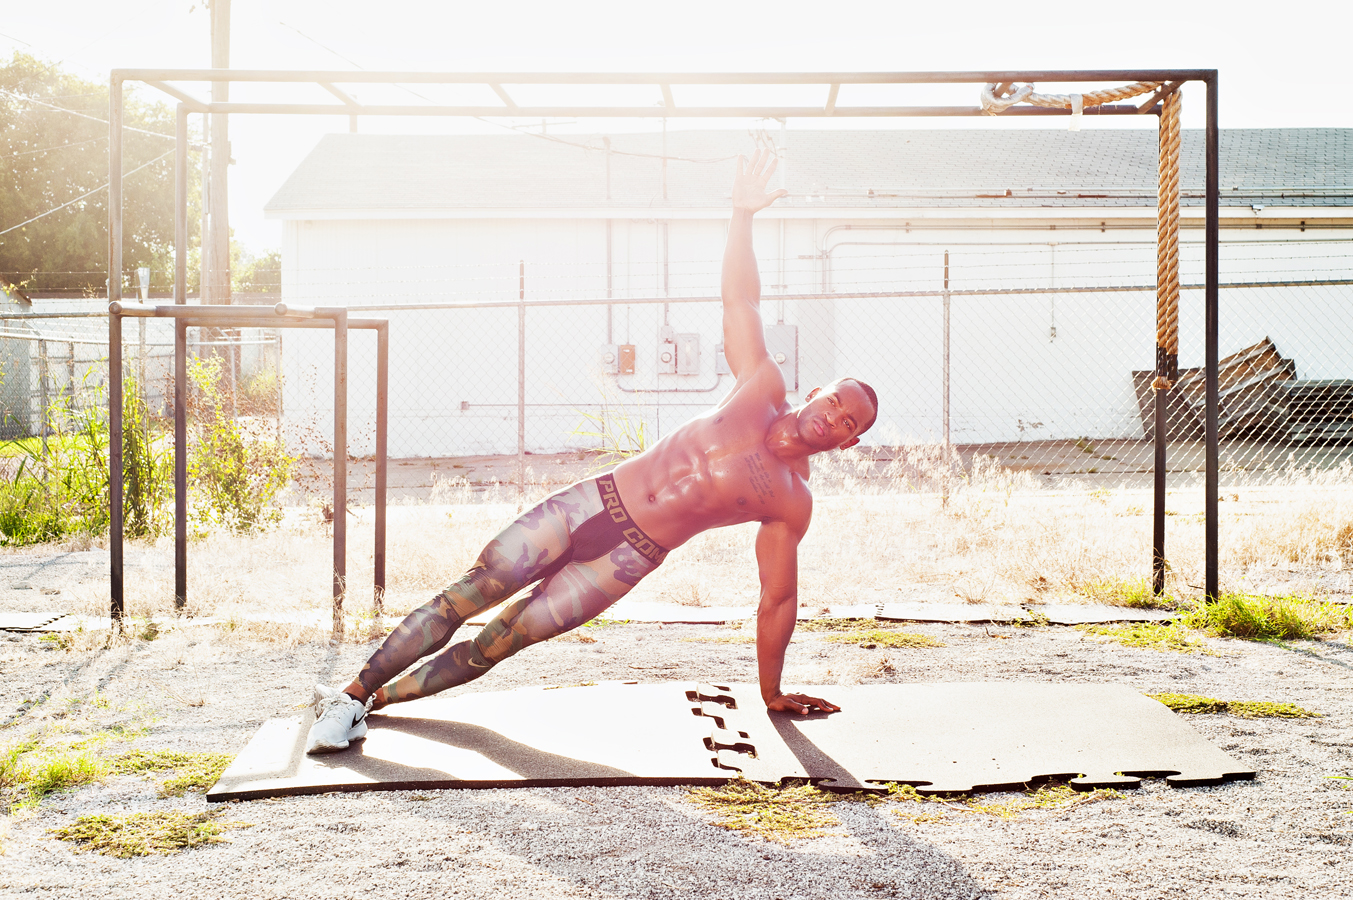 Fit black man doing side planks out outside shirtless. 

Kenneth M. Ruggiano is a photographer specializing in Sports and Fitness Photography based in Tulsa Oklahoma.